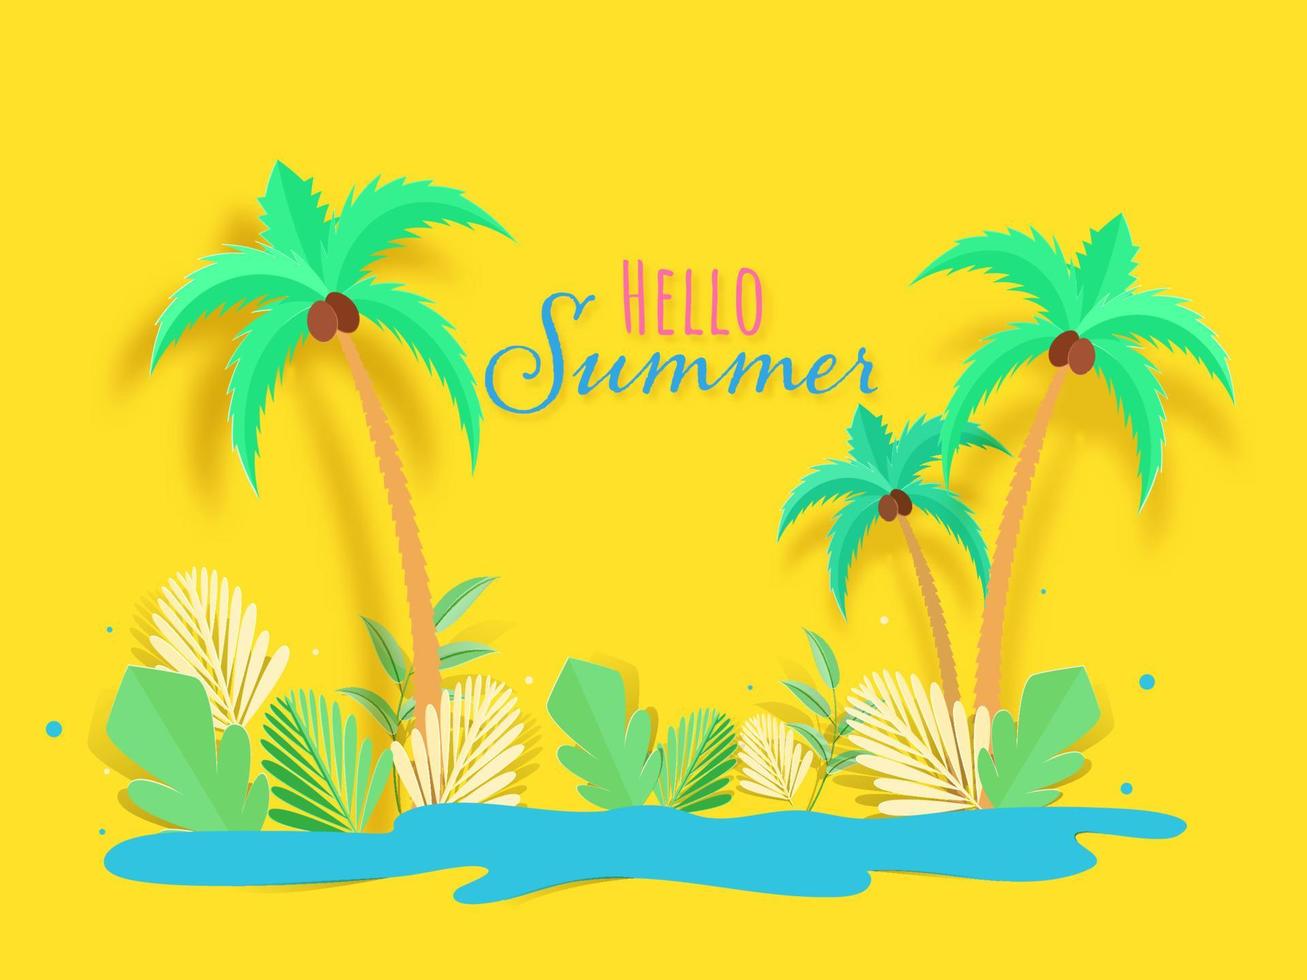 Hello Summer Font with Paper Cut Coconut Trees, Tropical Leaves and Blue Water Splash on Yellow Background. vector